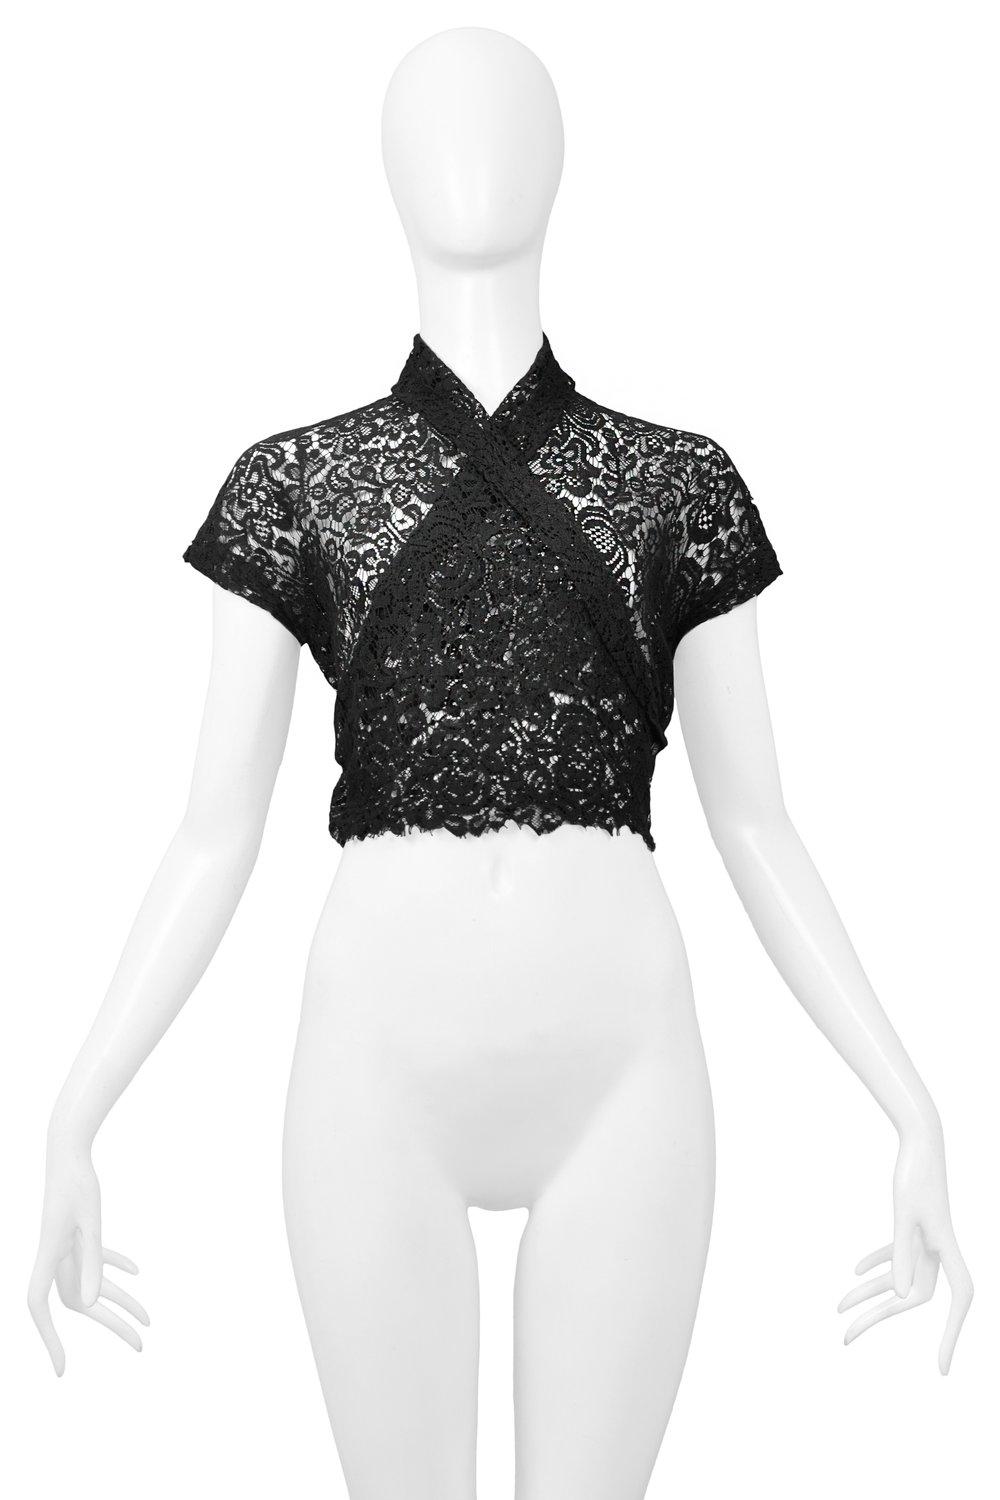 Resurrection Vintage is excited to offer a vintage Romeo Gigli black lace wrap top featuring overlapping front panels, side buttons closure, and shawl collar.

Romeo Gigli
Size Small
Lace Stretch
Excellent Vintage Condition
Authenticity Guaranteed